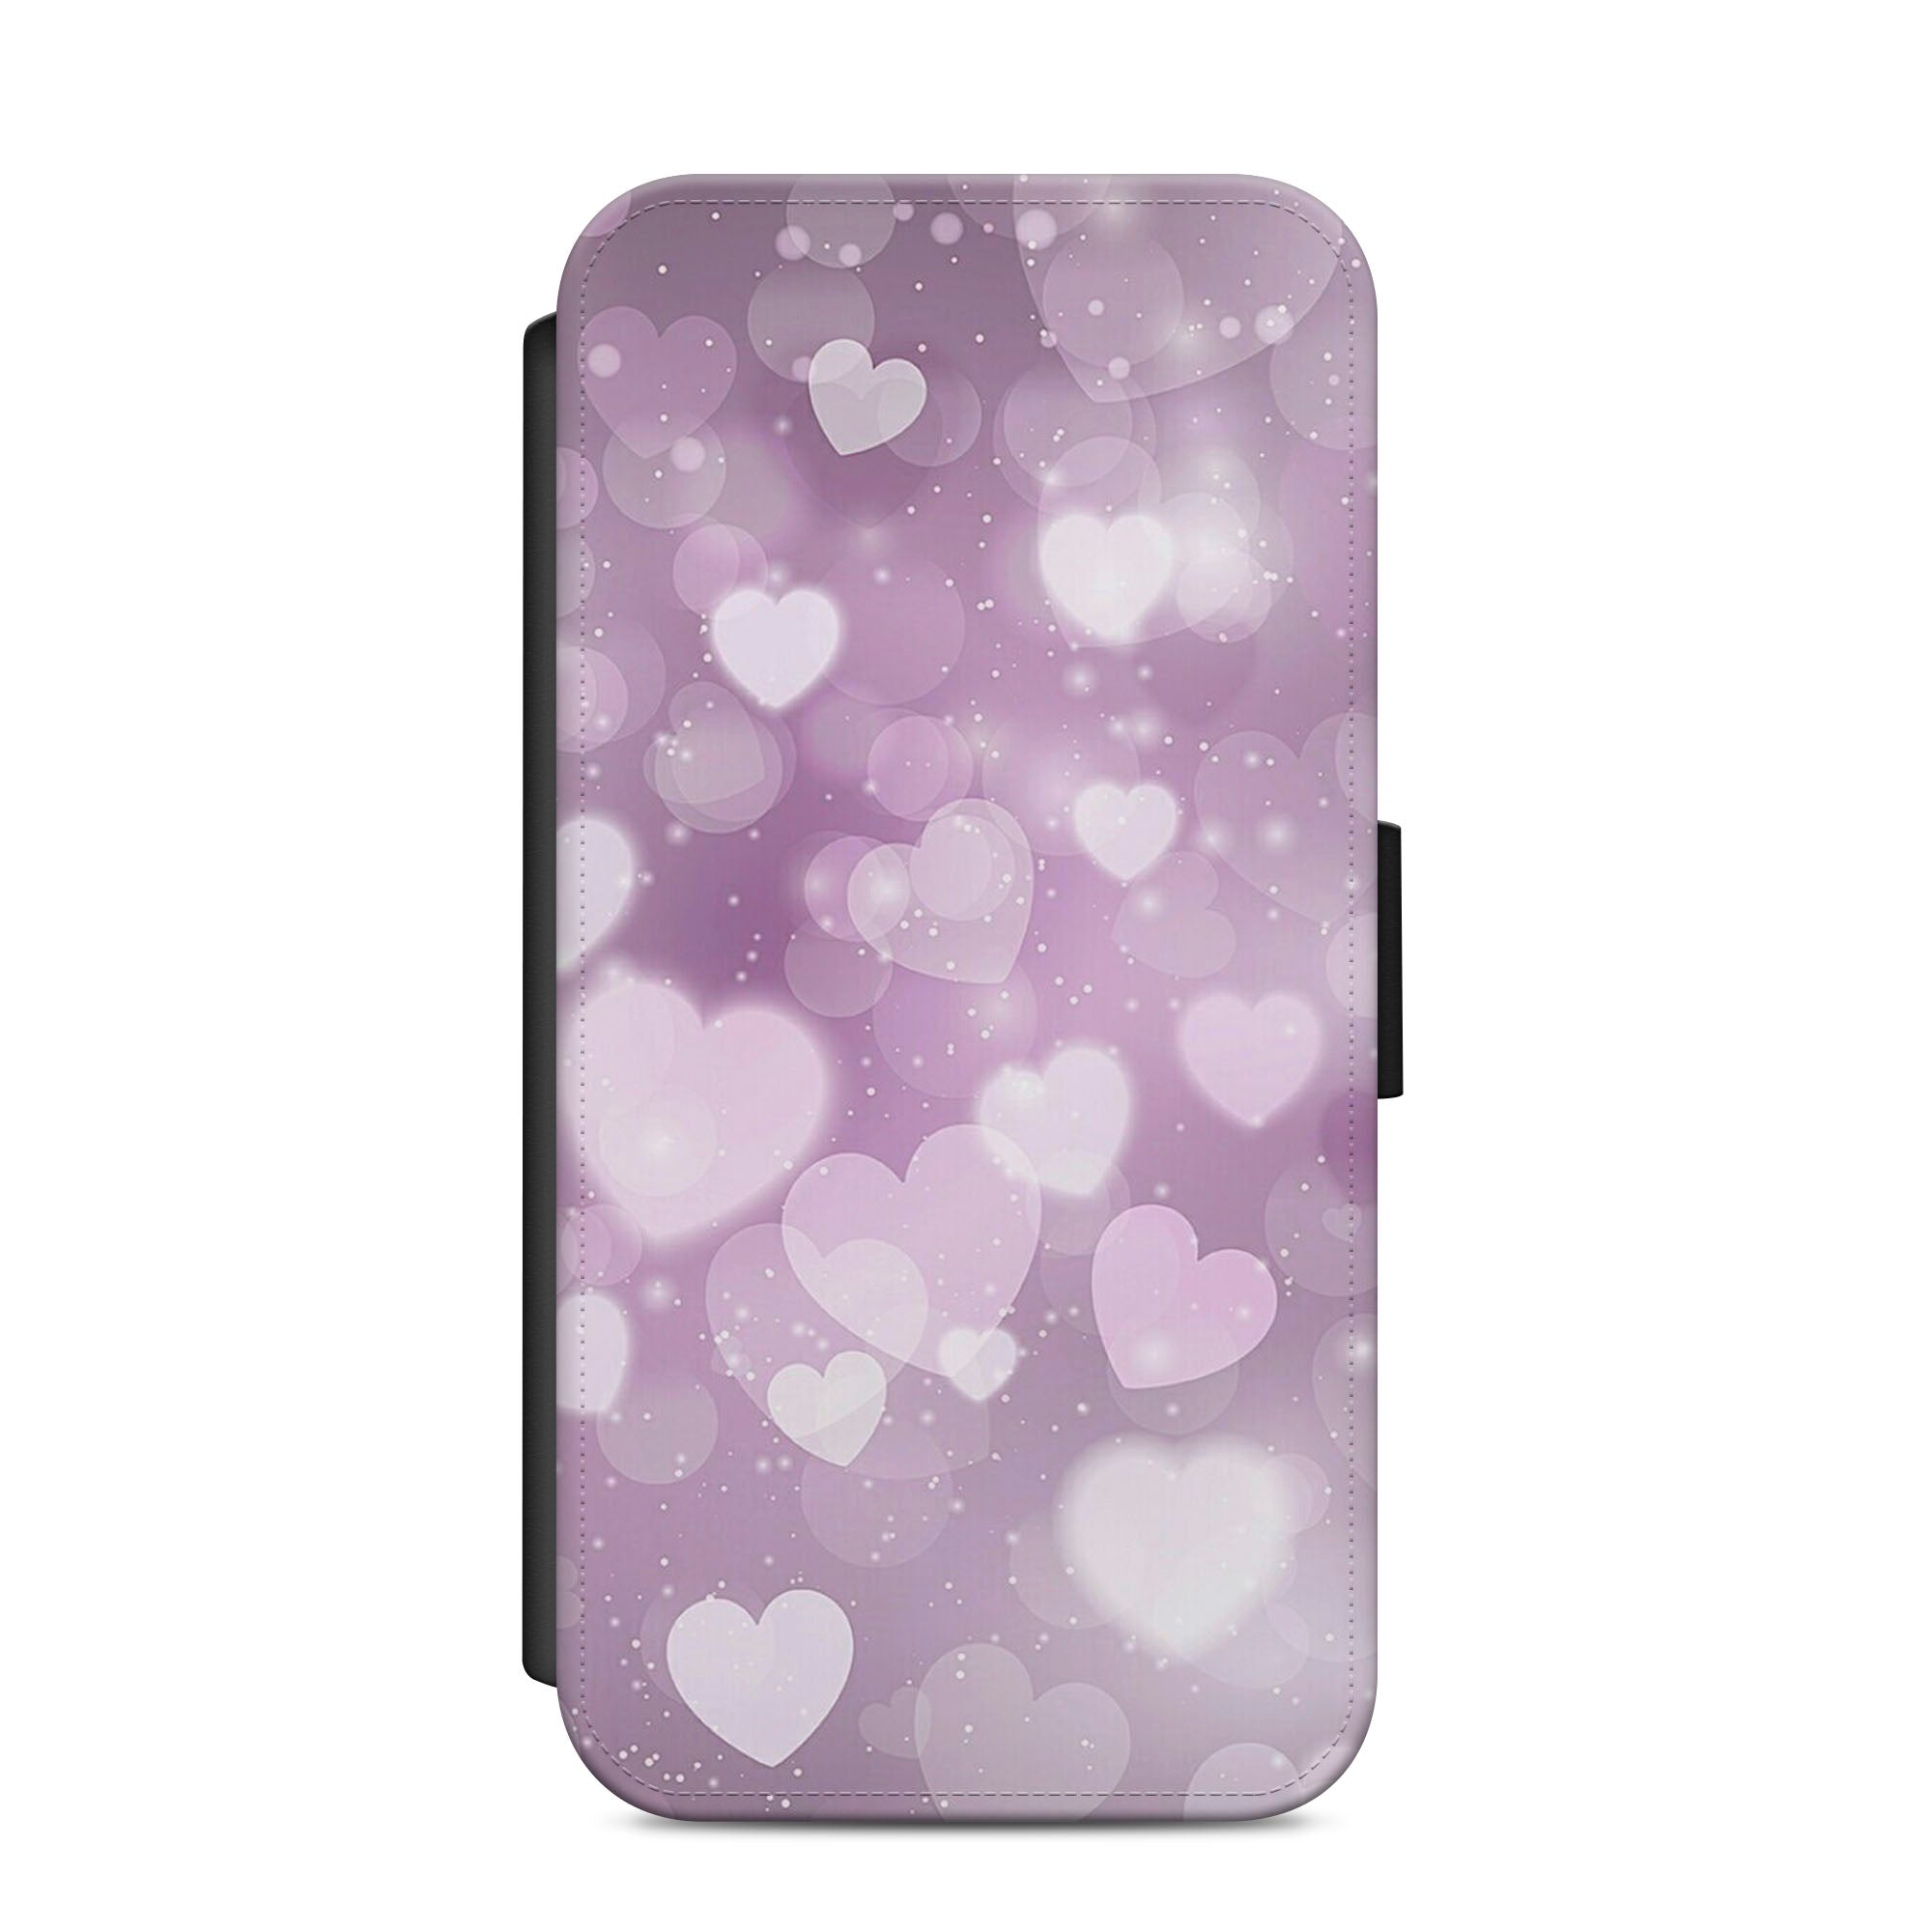 Pink & Purple Love Hearts Faux Leather Flip Case Wallet for iPhone / Samsung